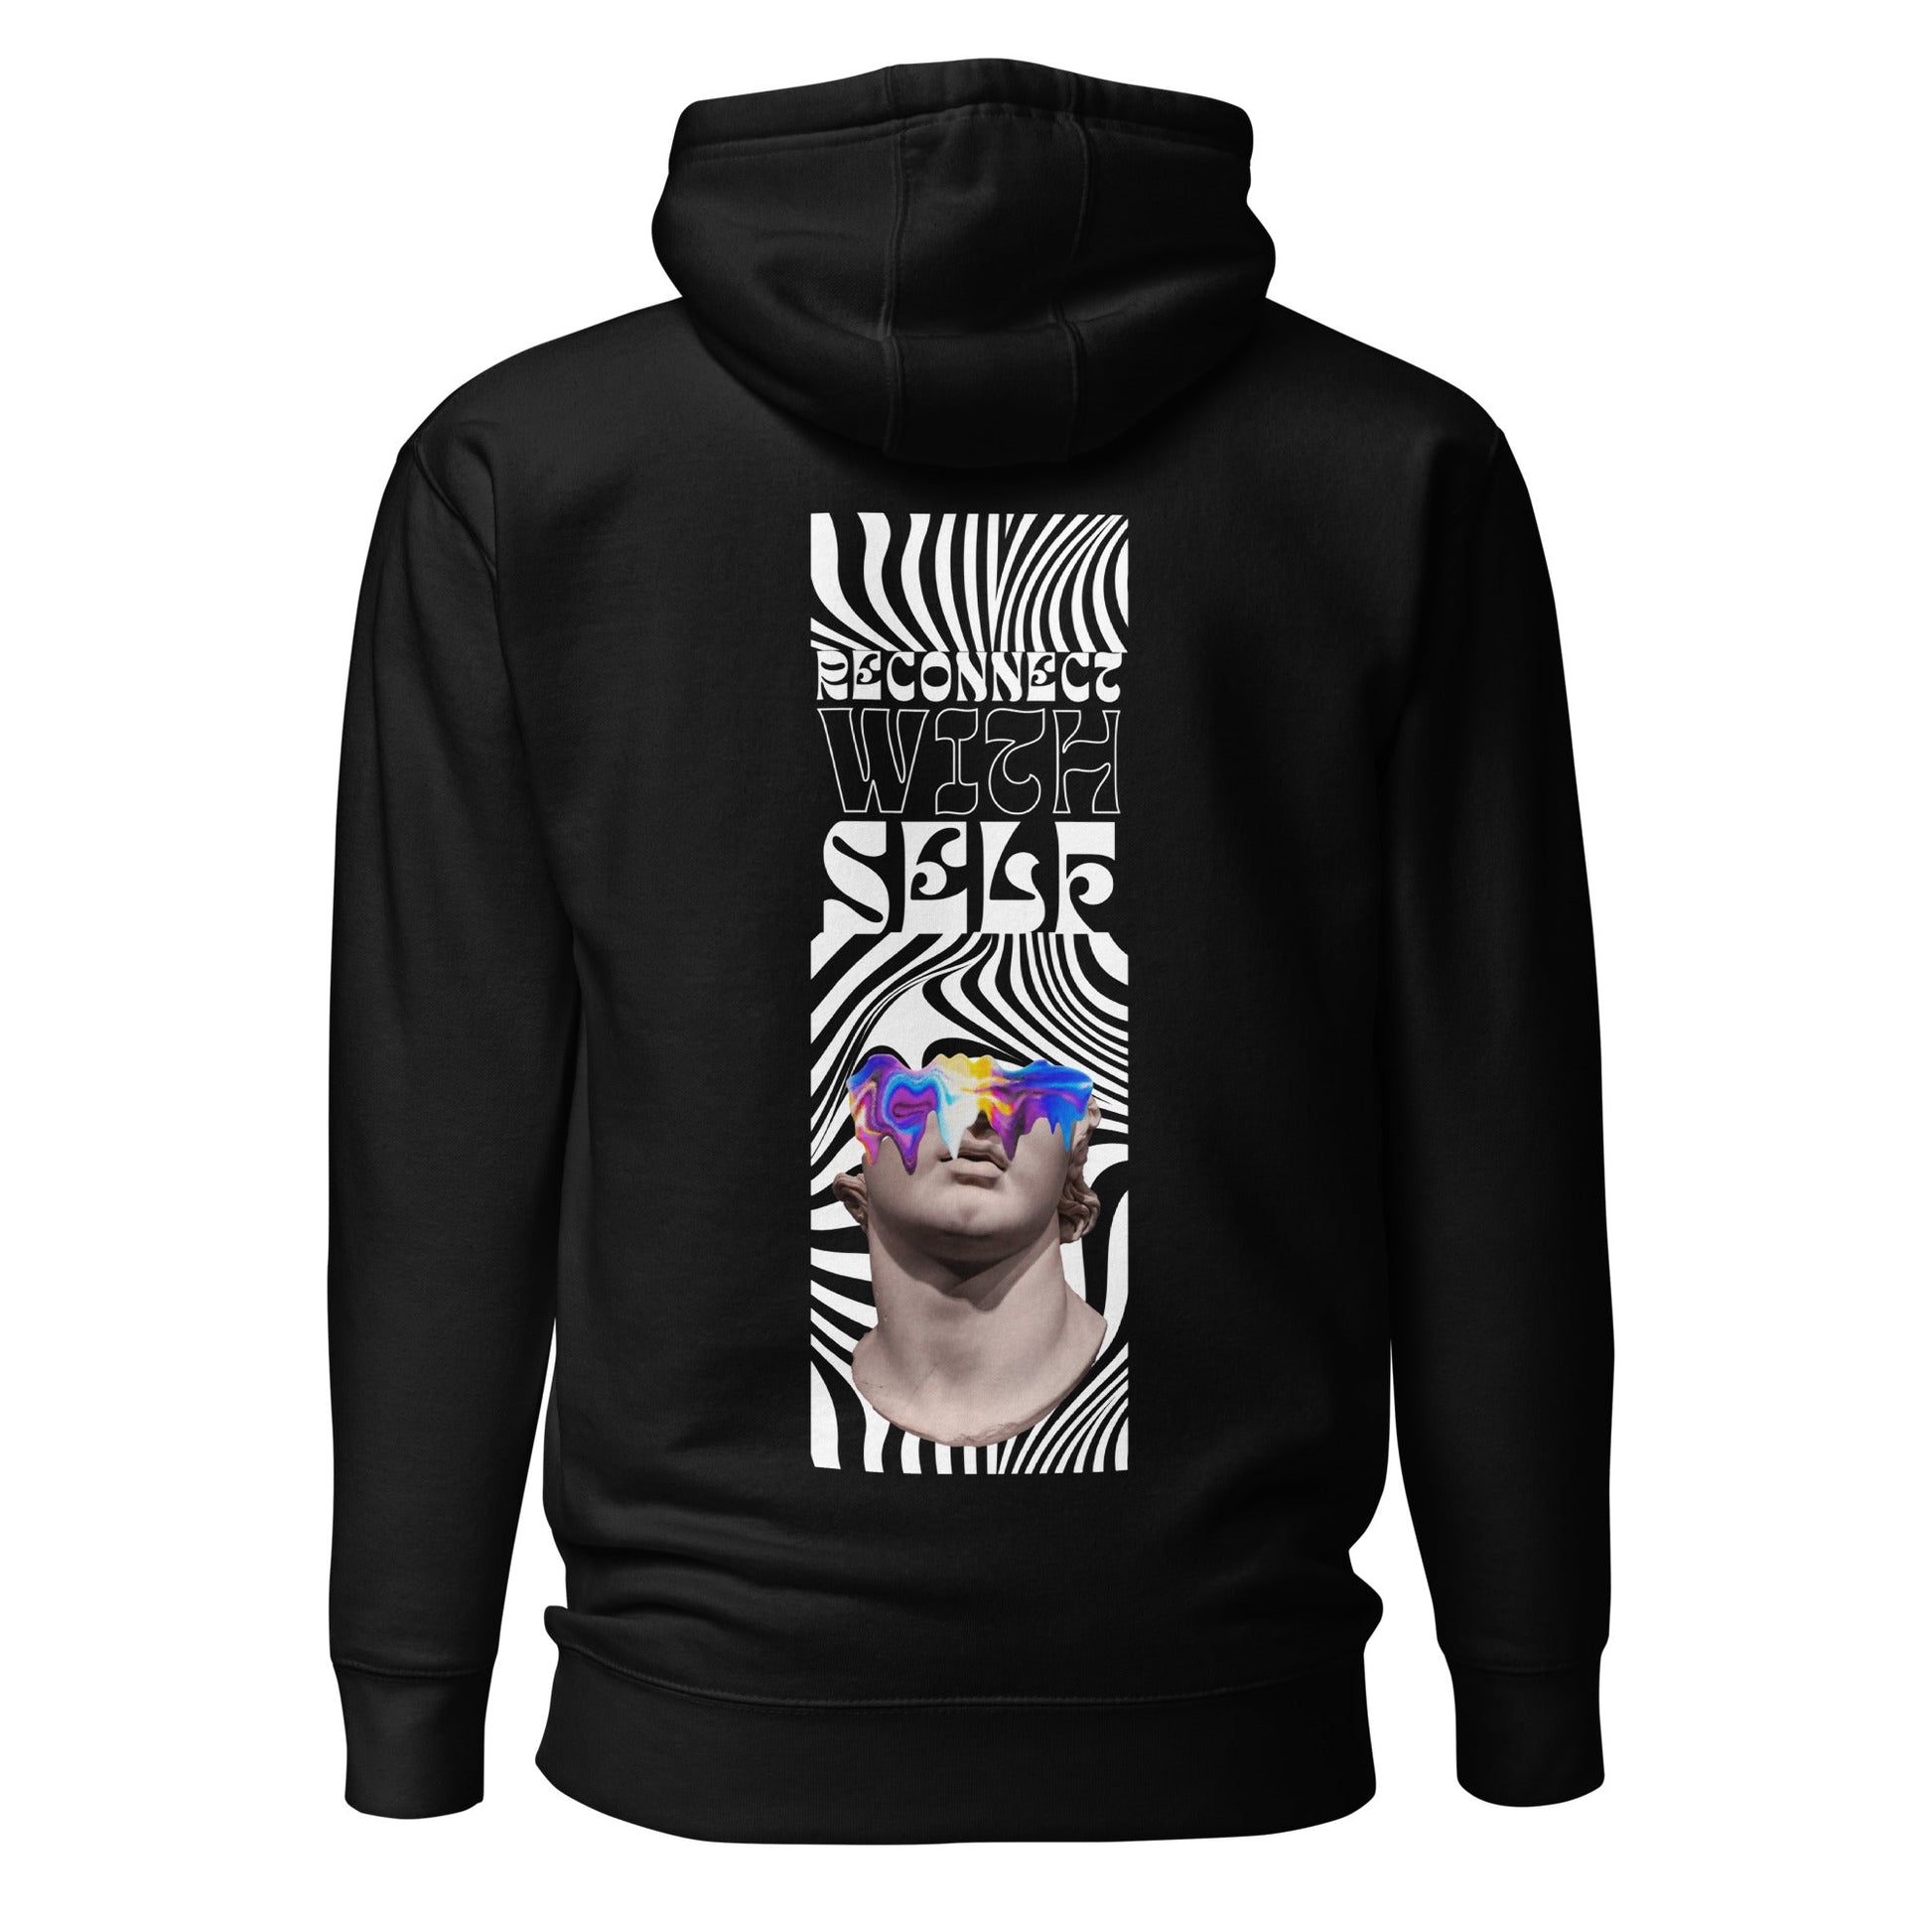 Rebellious1s 'Reconnect With Self' Hoodie - REBELLIOUS1S